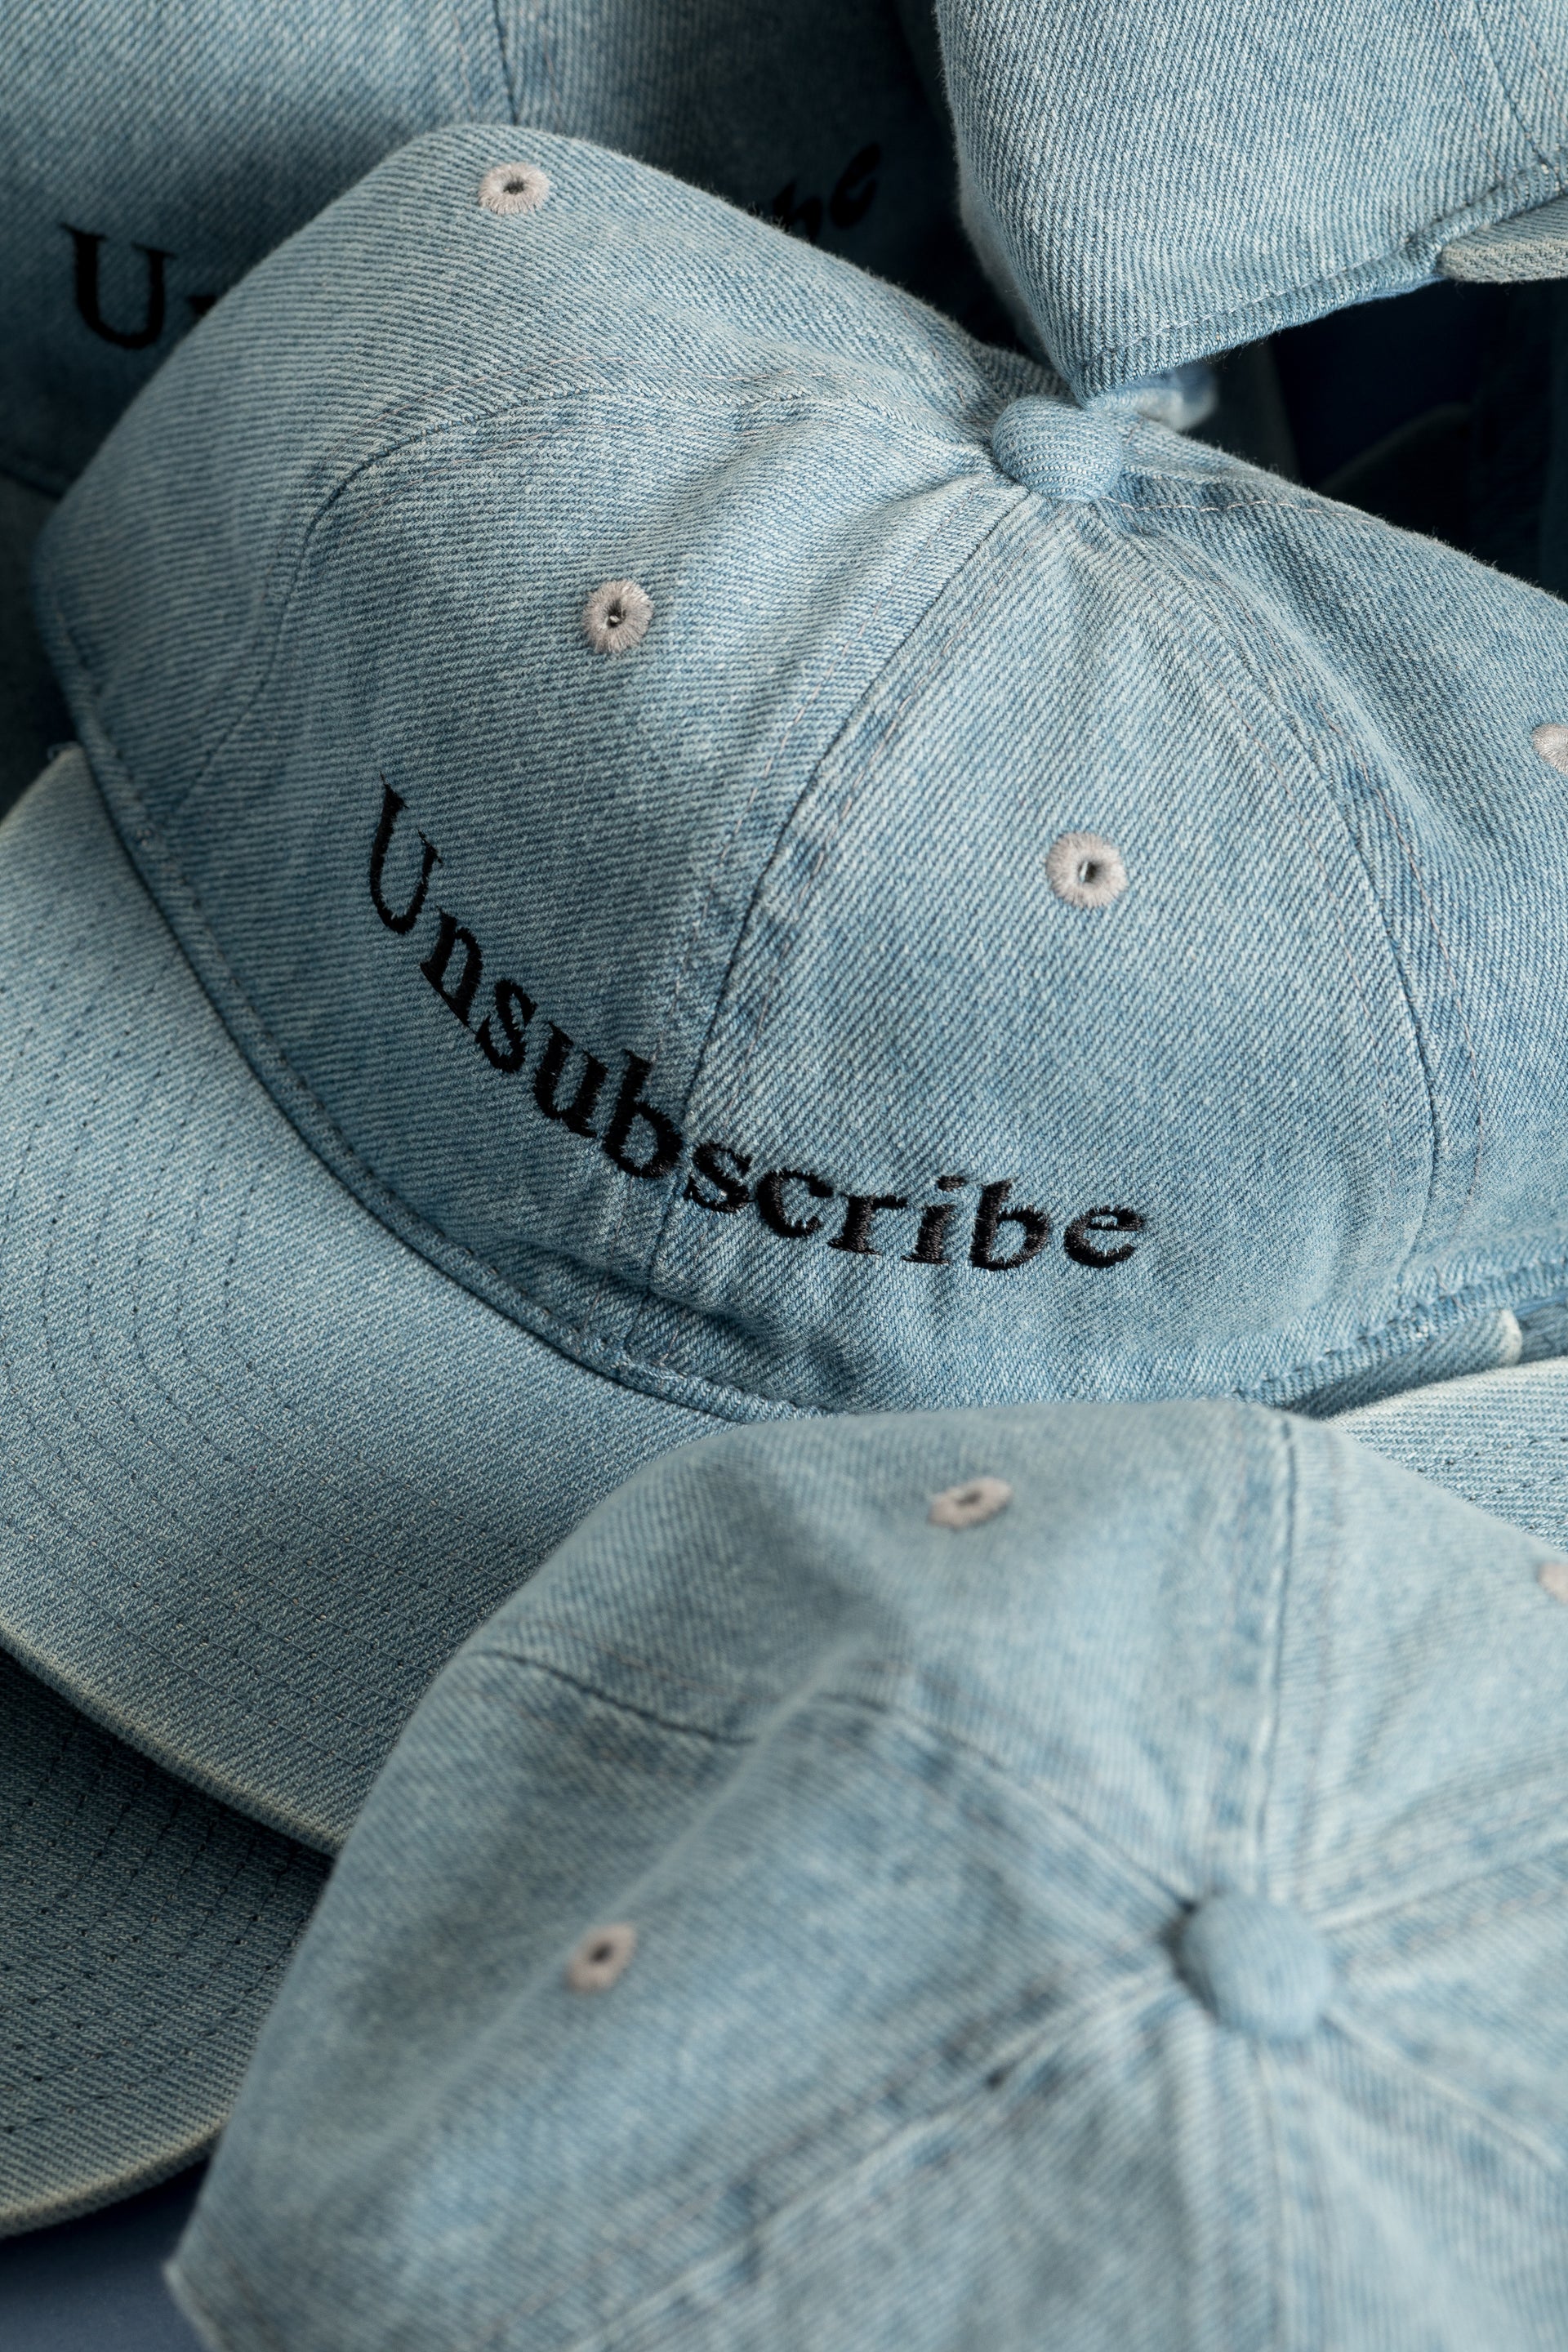 Unsubscribe Hat